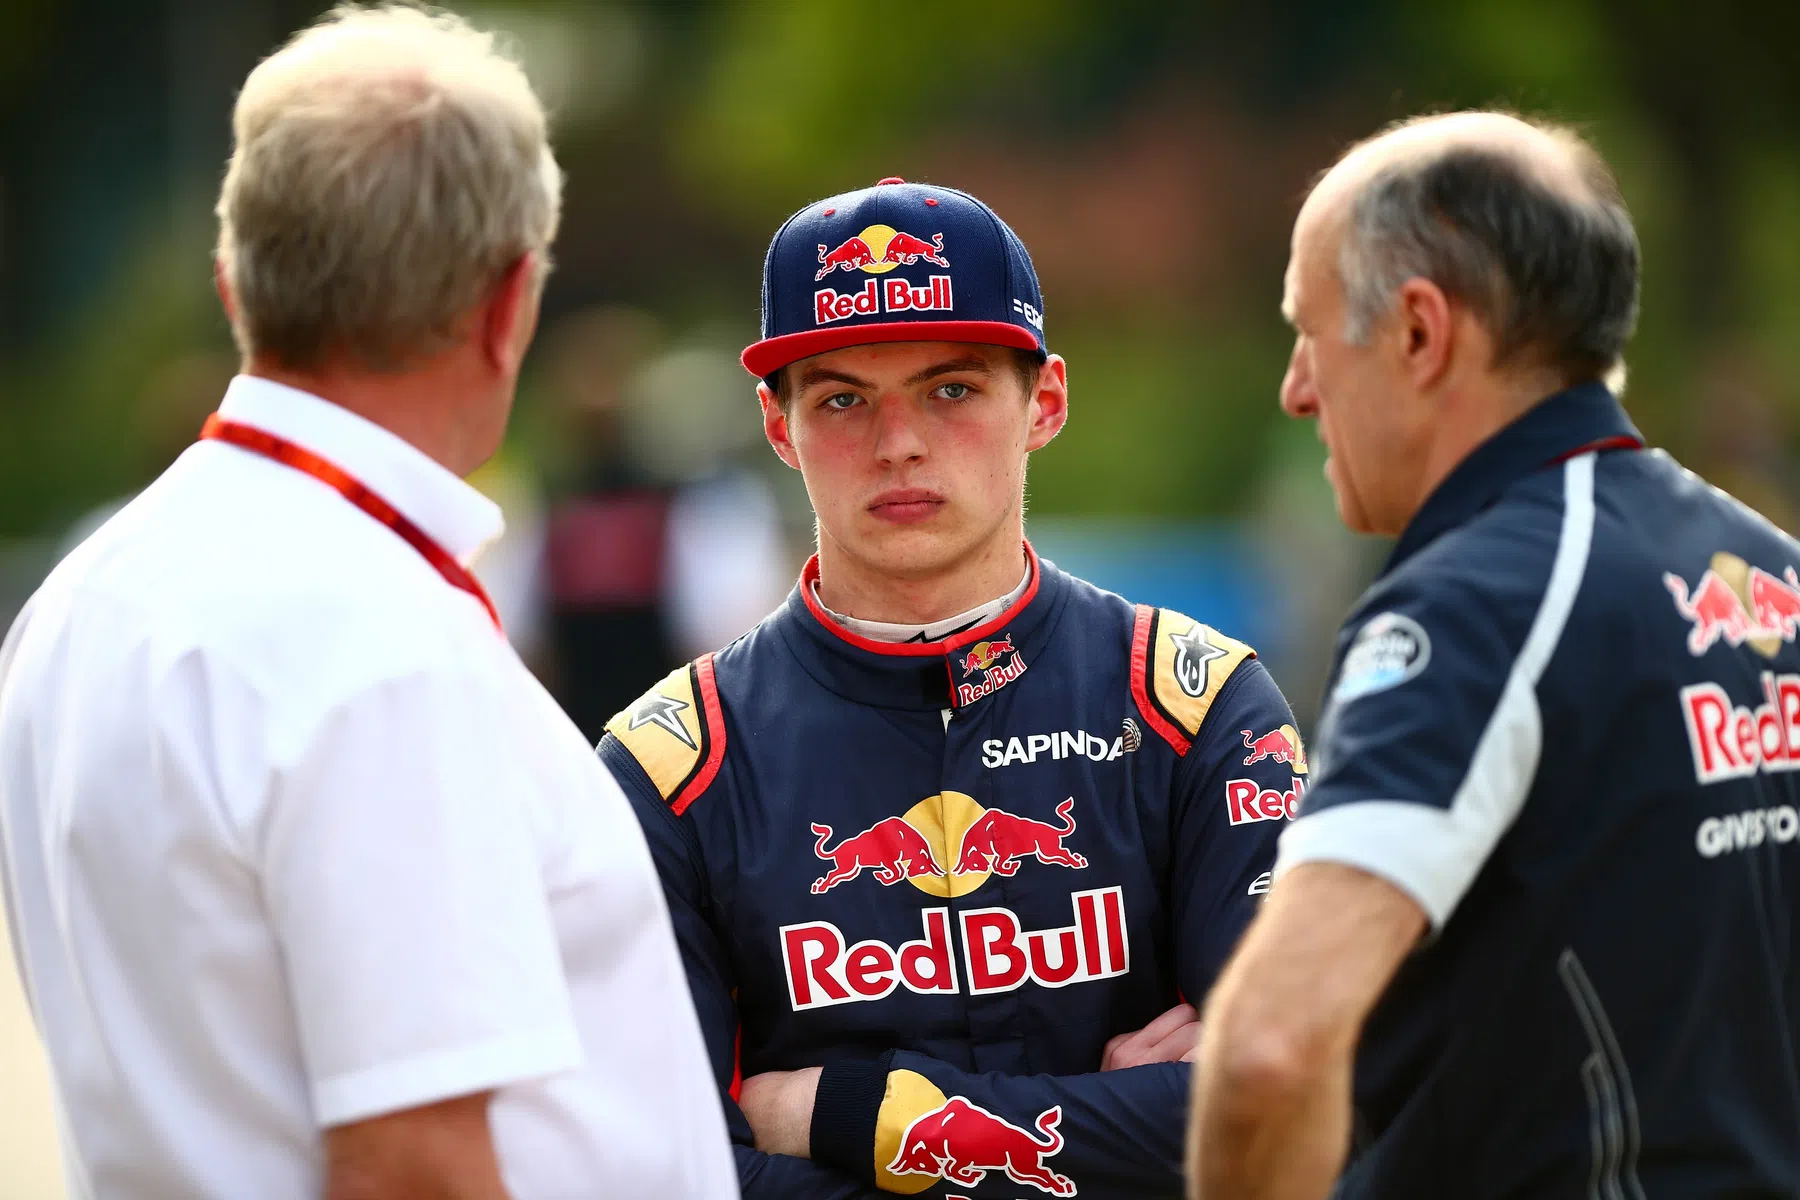 Proud Franz Tost with fine words for Verstappen